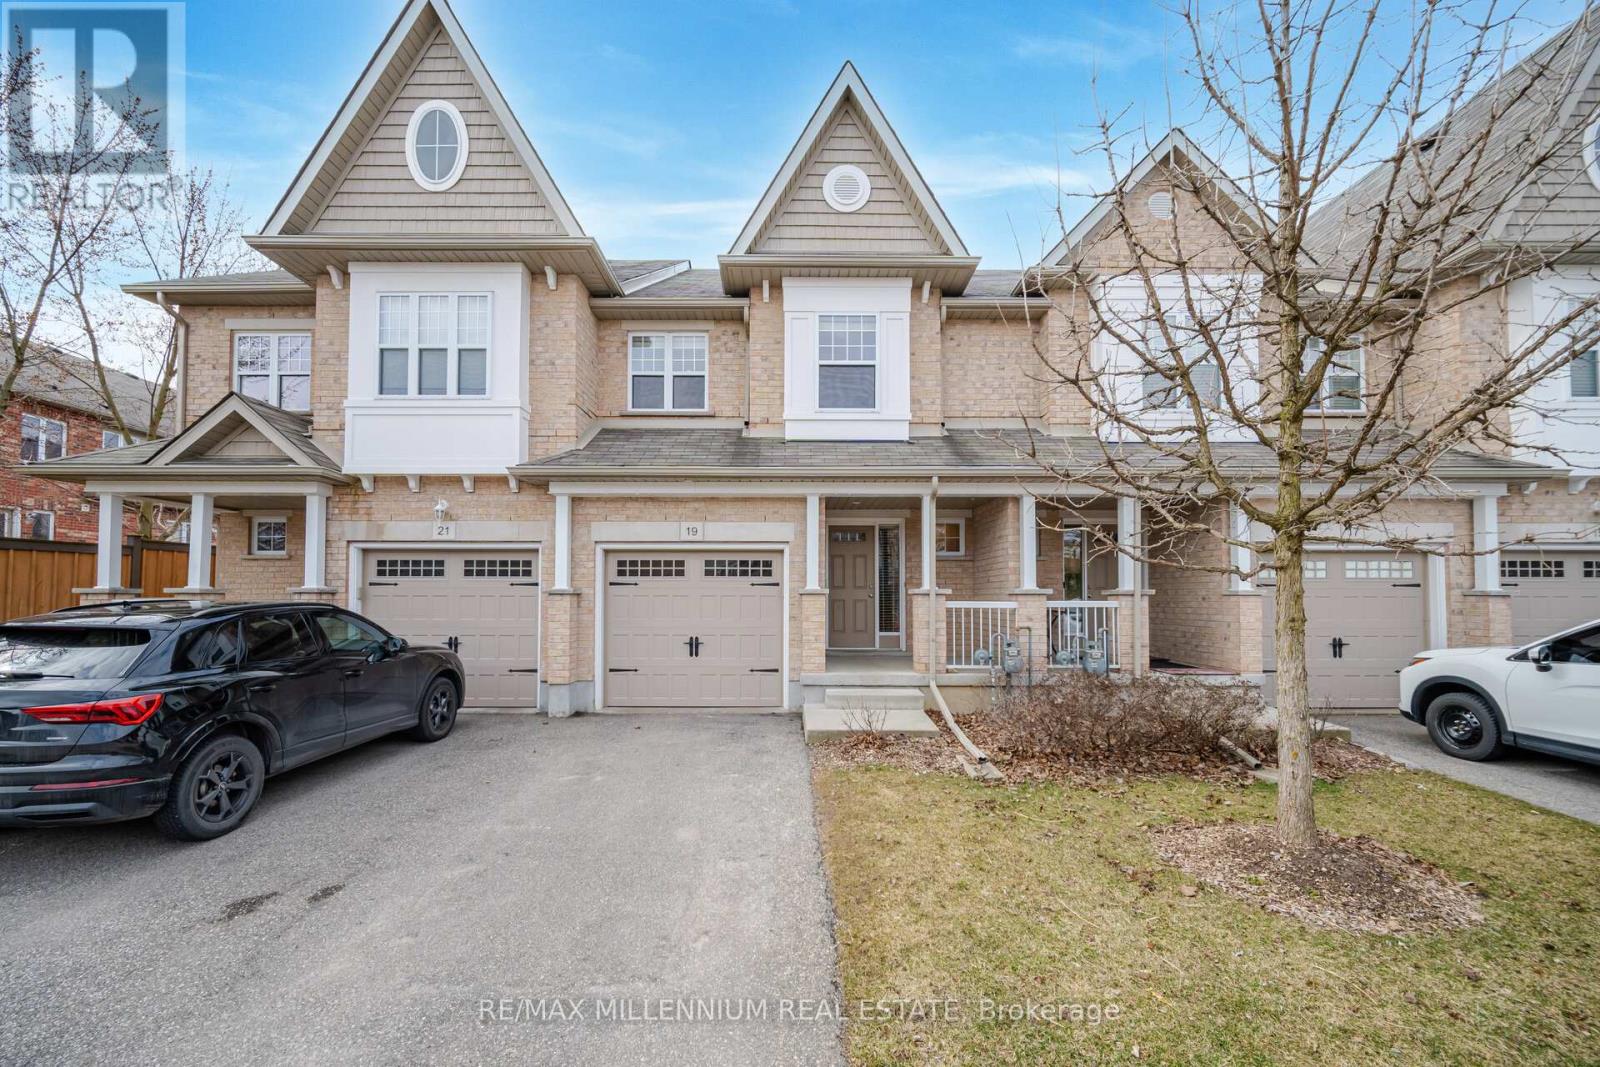 #19 -19 SUMMERFIELD DR S, guelph, Ontario